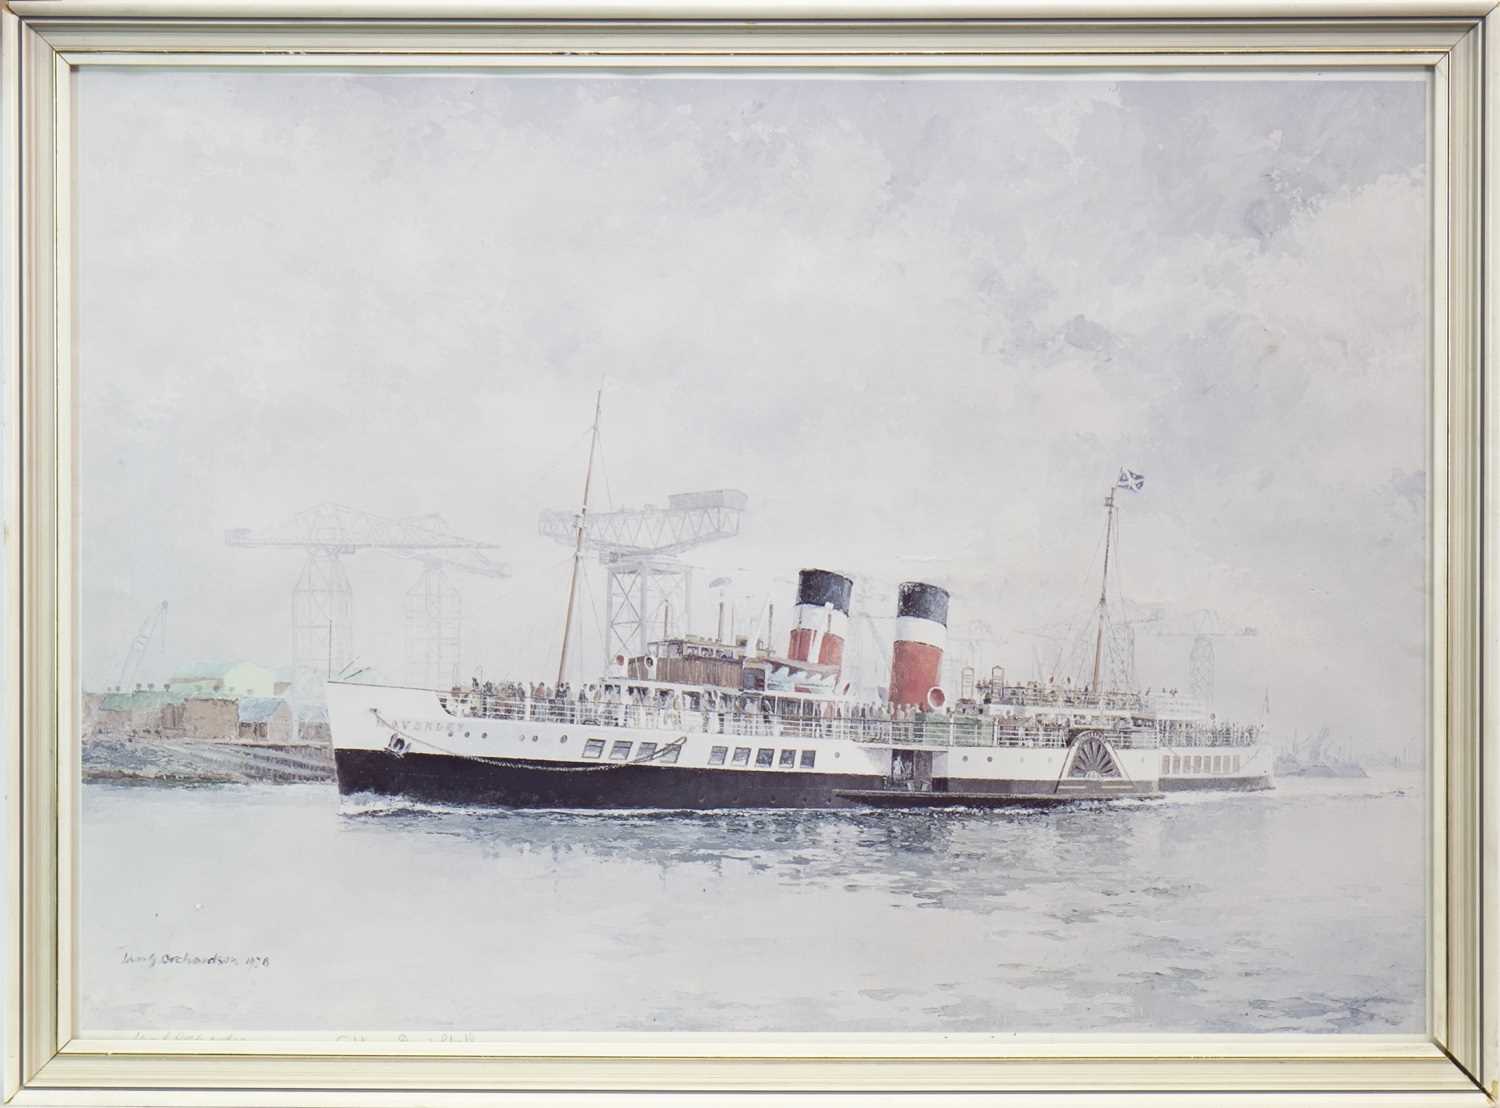 Lot 609 - THE WAVERLEY PASSING BROWN'S SHIPYARD, A PRINT BY IAN ORCHARDSON